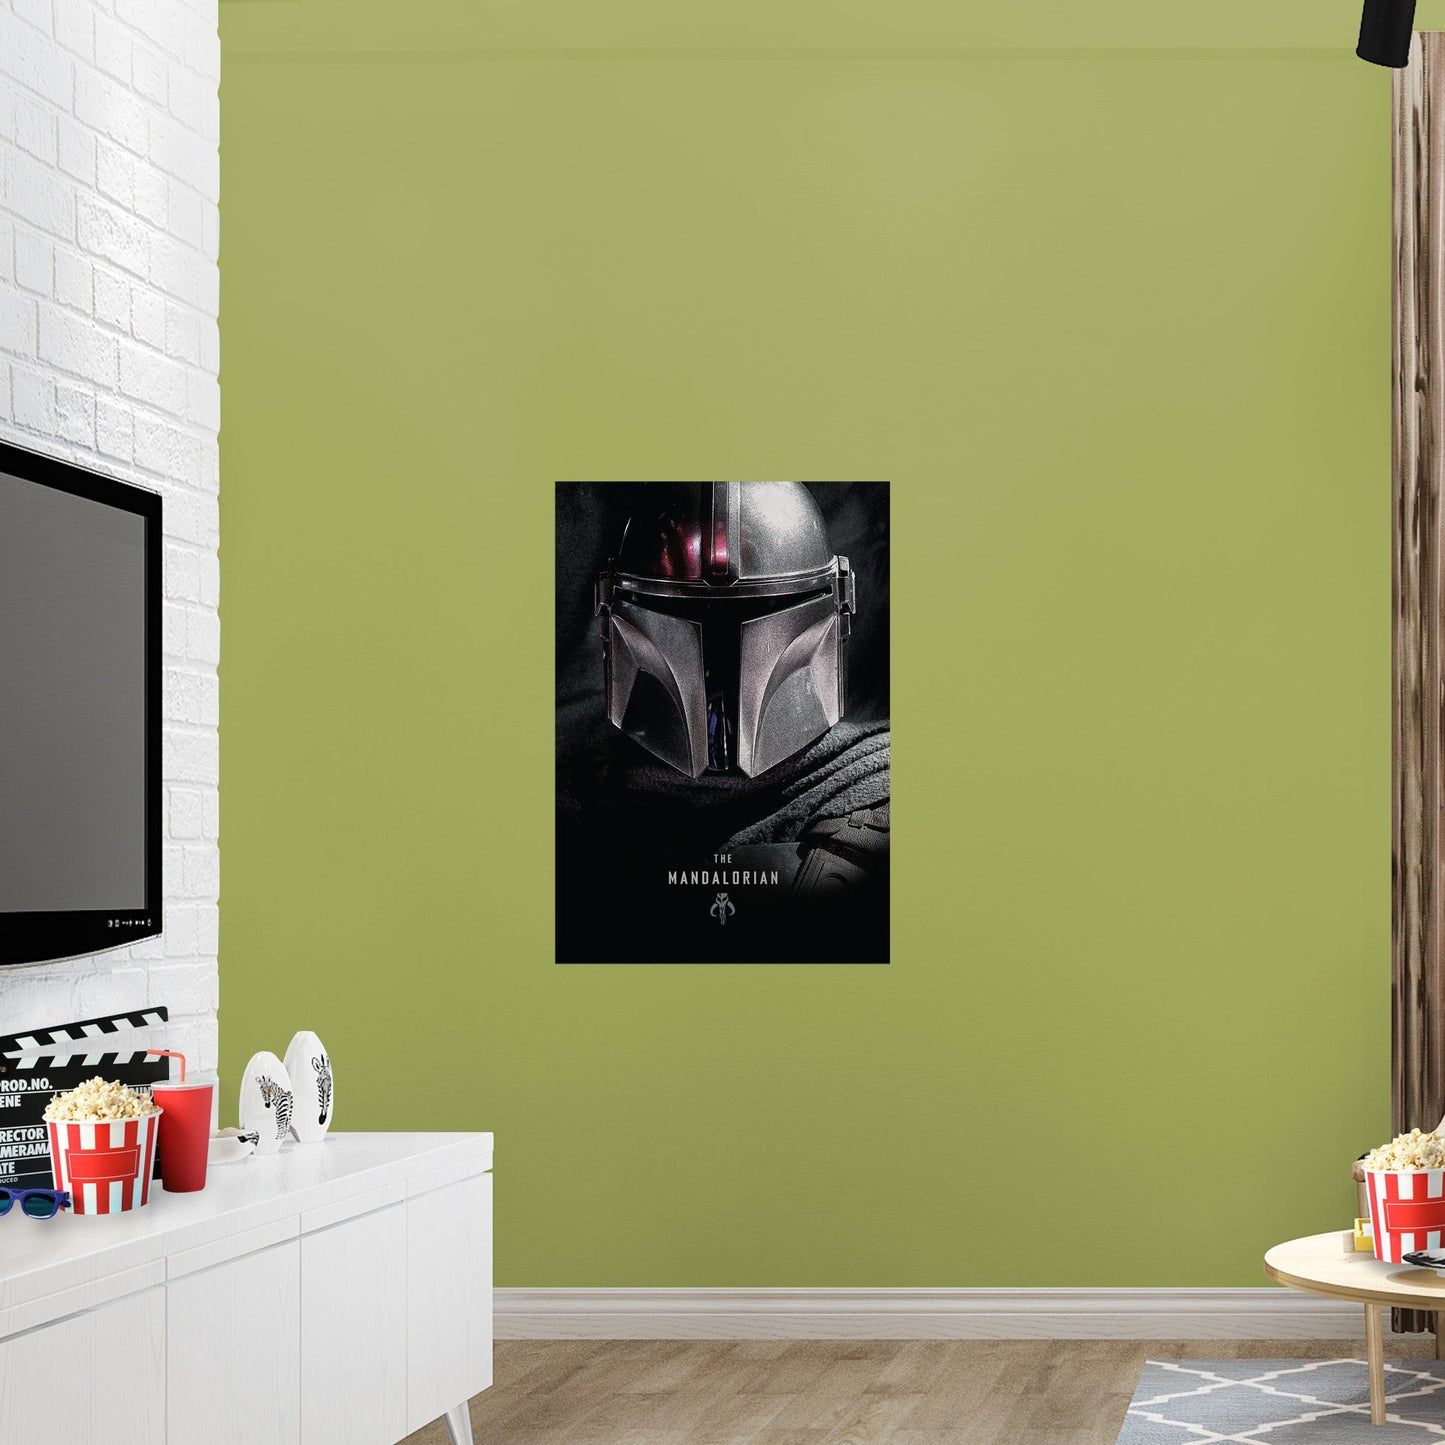 The Mandalorian: The Mandalorian Helmet Poster - Officially Licensed Star Wars Removable Adhesive Decal